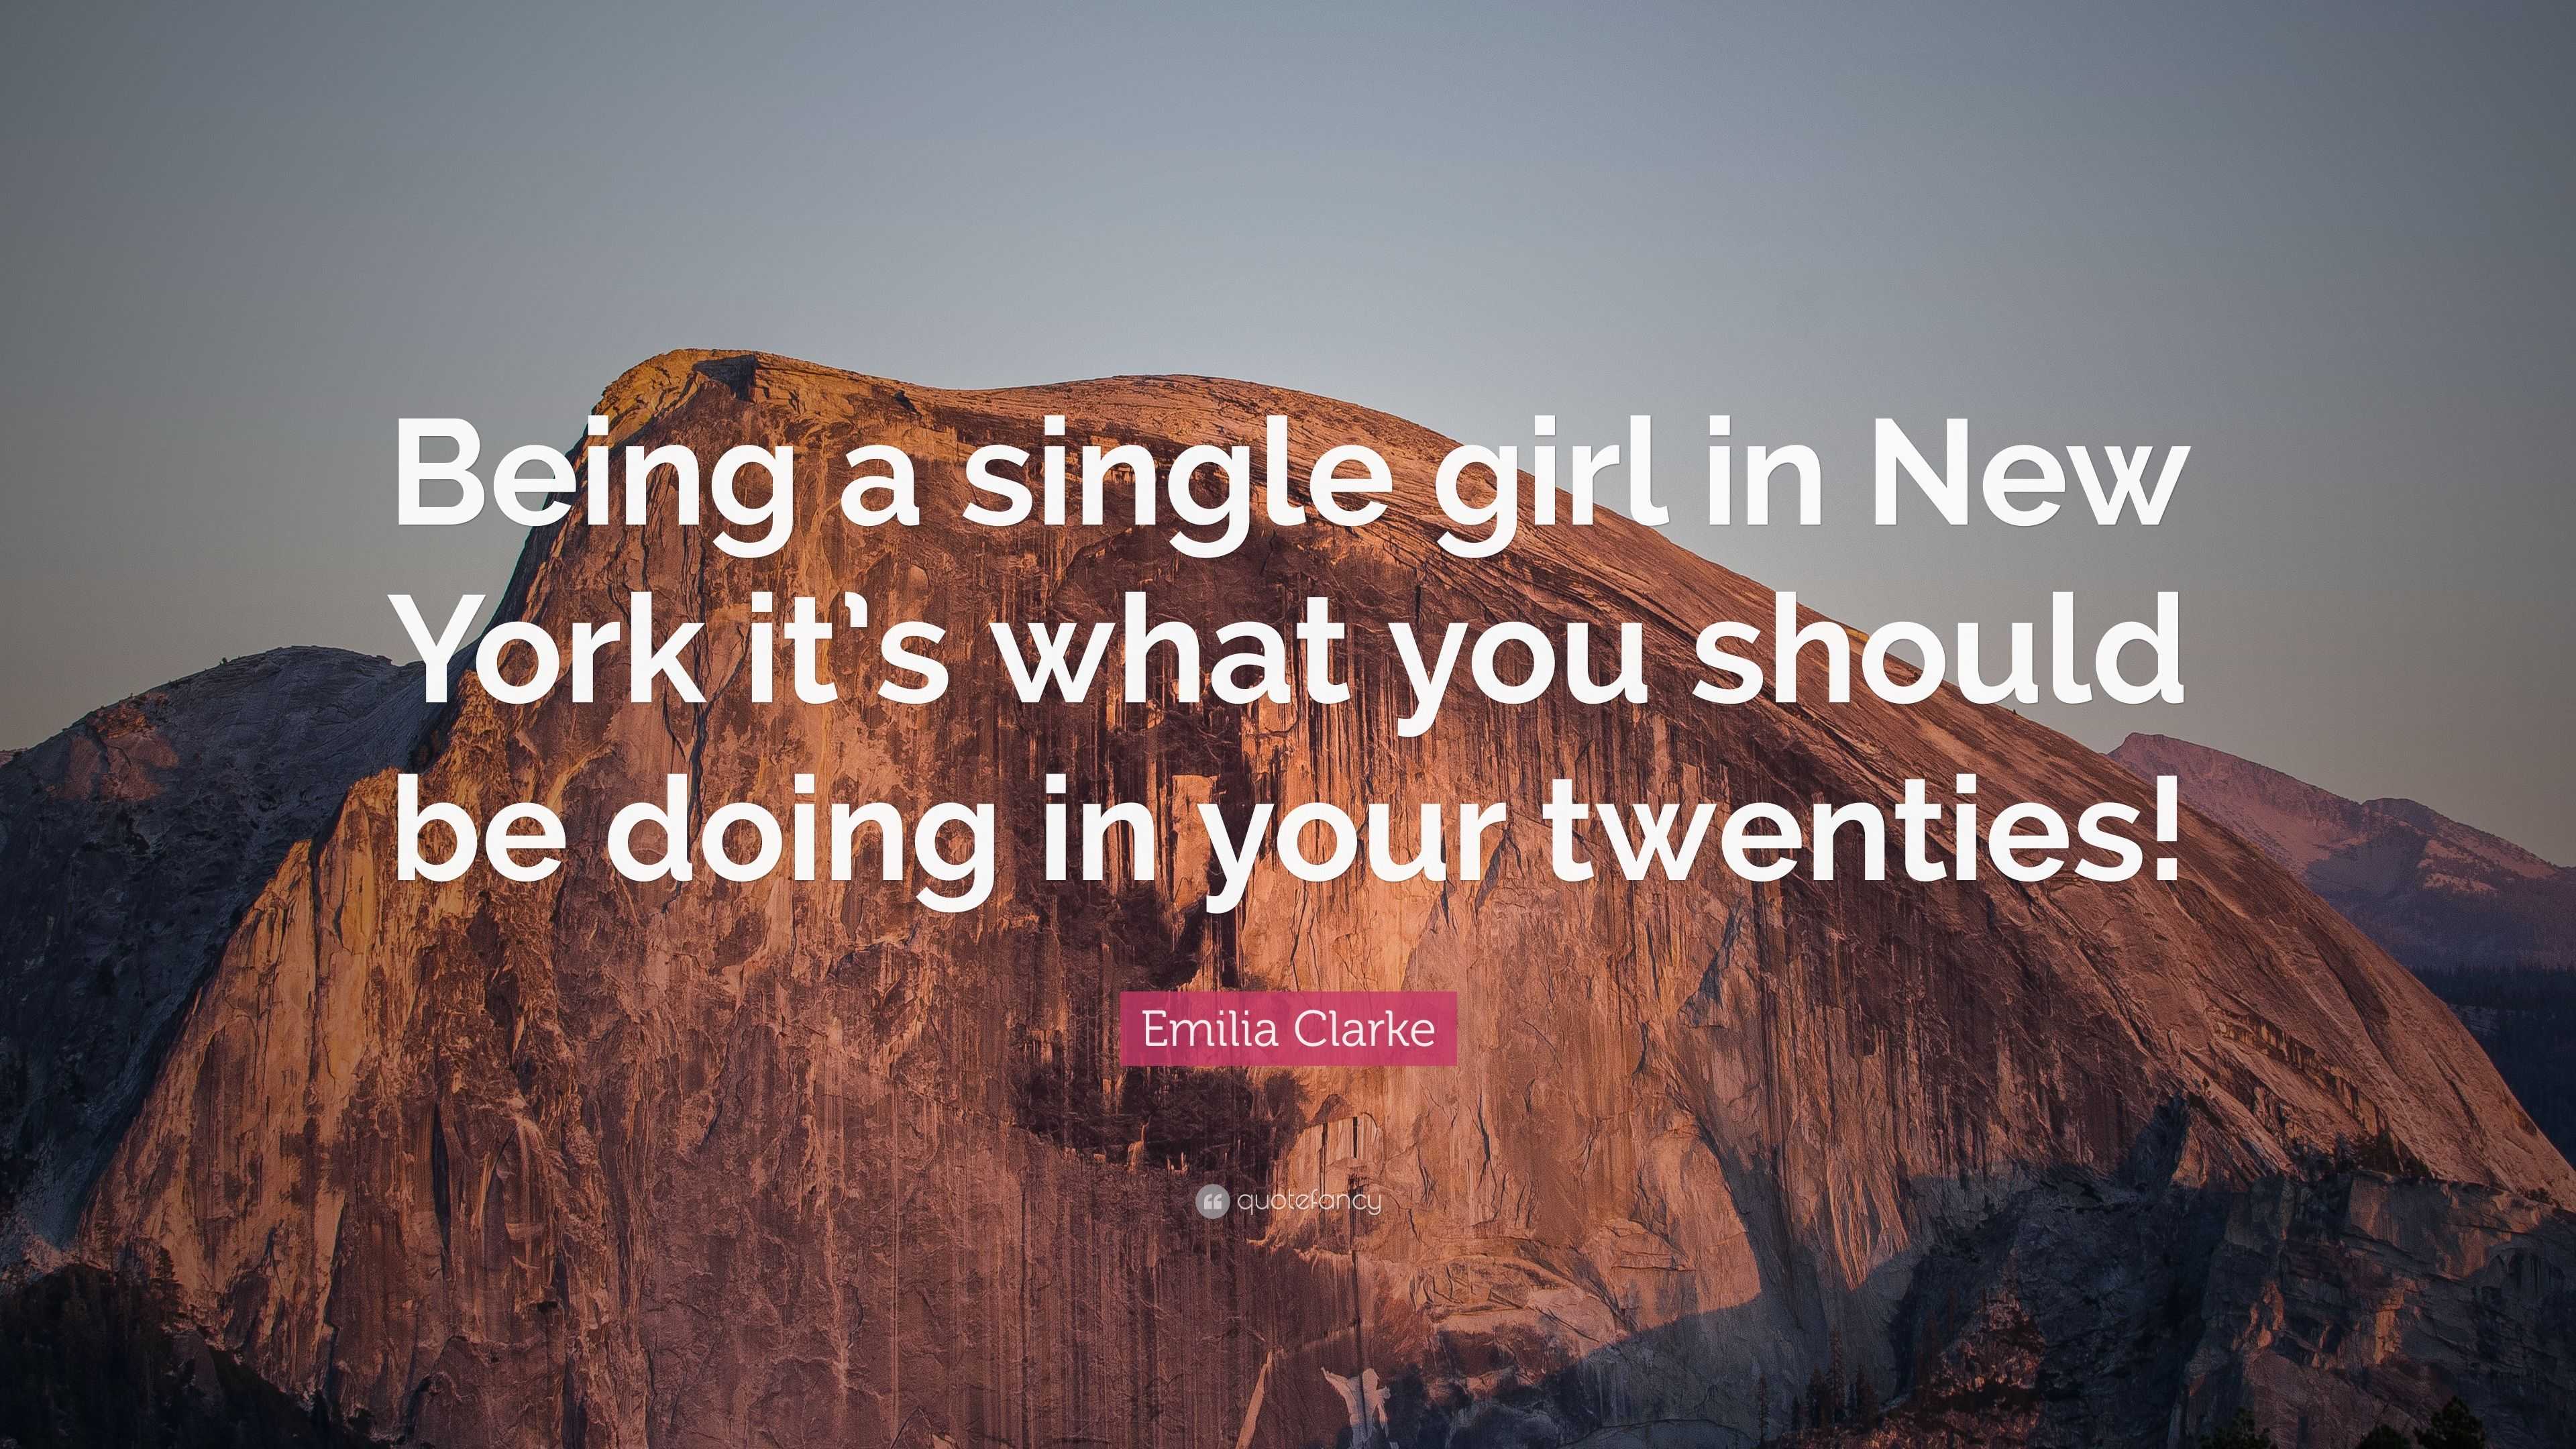 Emilia Clarke Quote: “Being a single girl in New York it’s what you ...